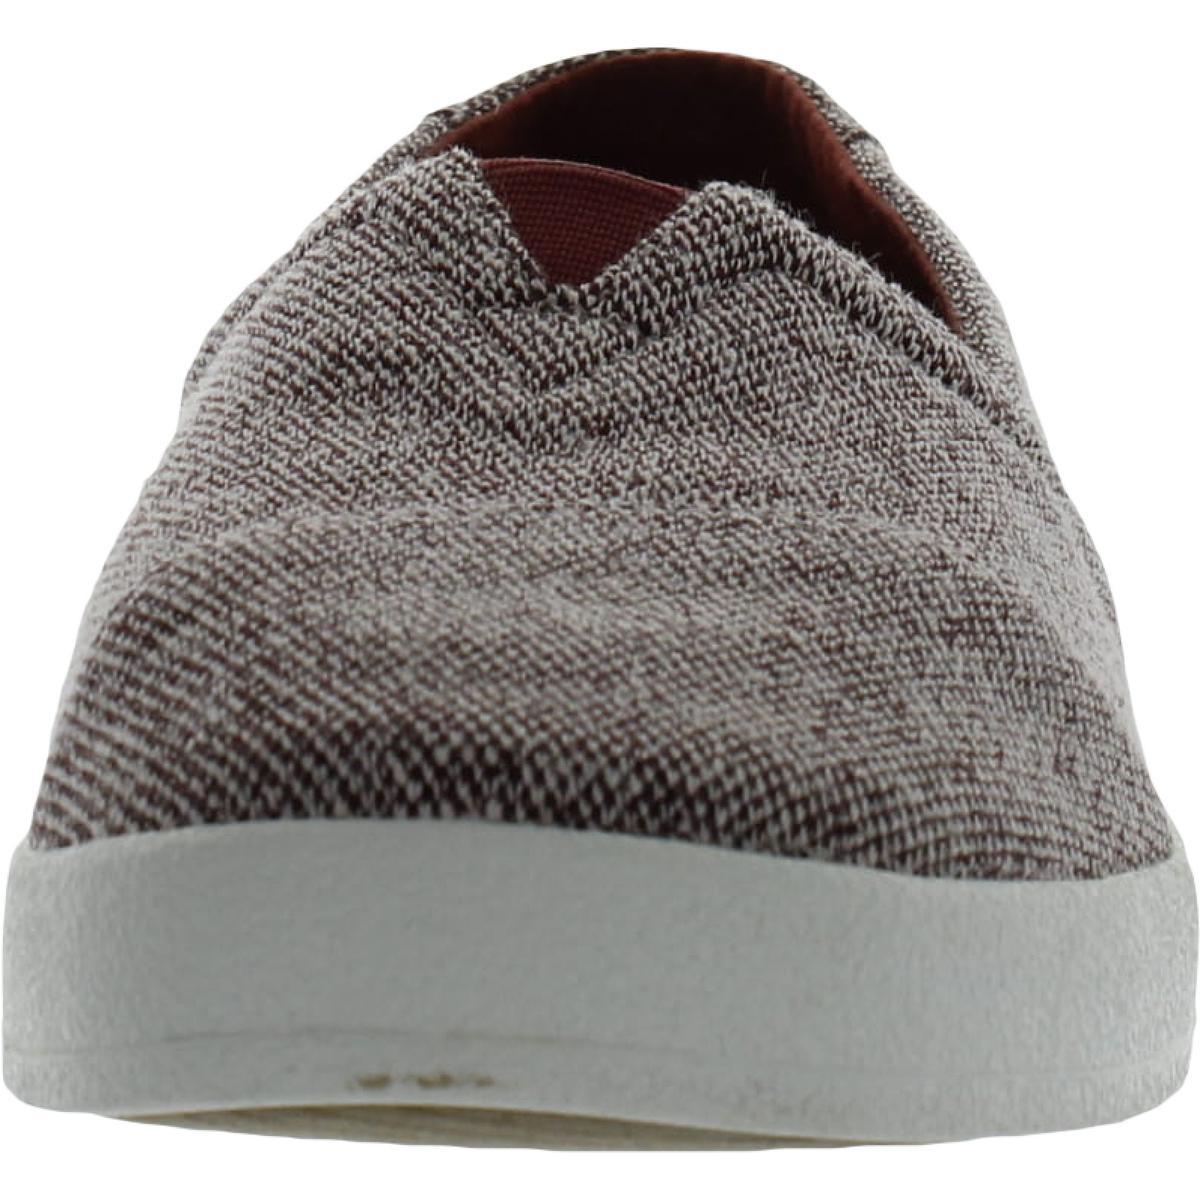 TOMS Avalon Laceless Slip On Casual And Fashion Sneakers in Brown | Lyst